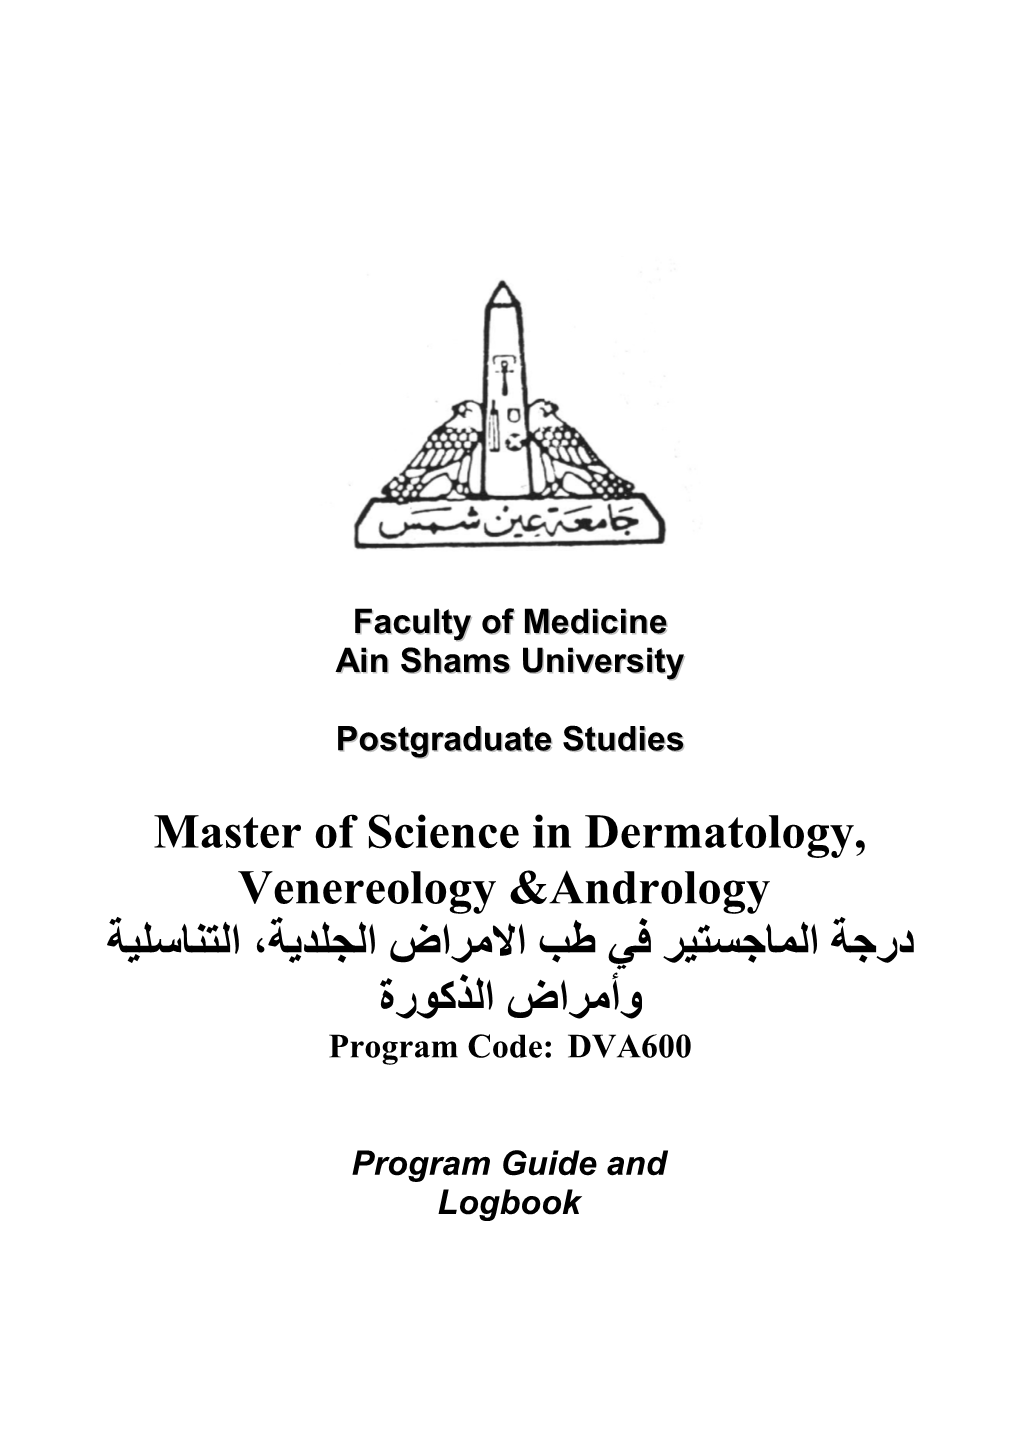 Master of Science in Dermatology, Venereology &Andrology